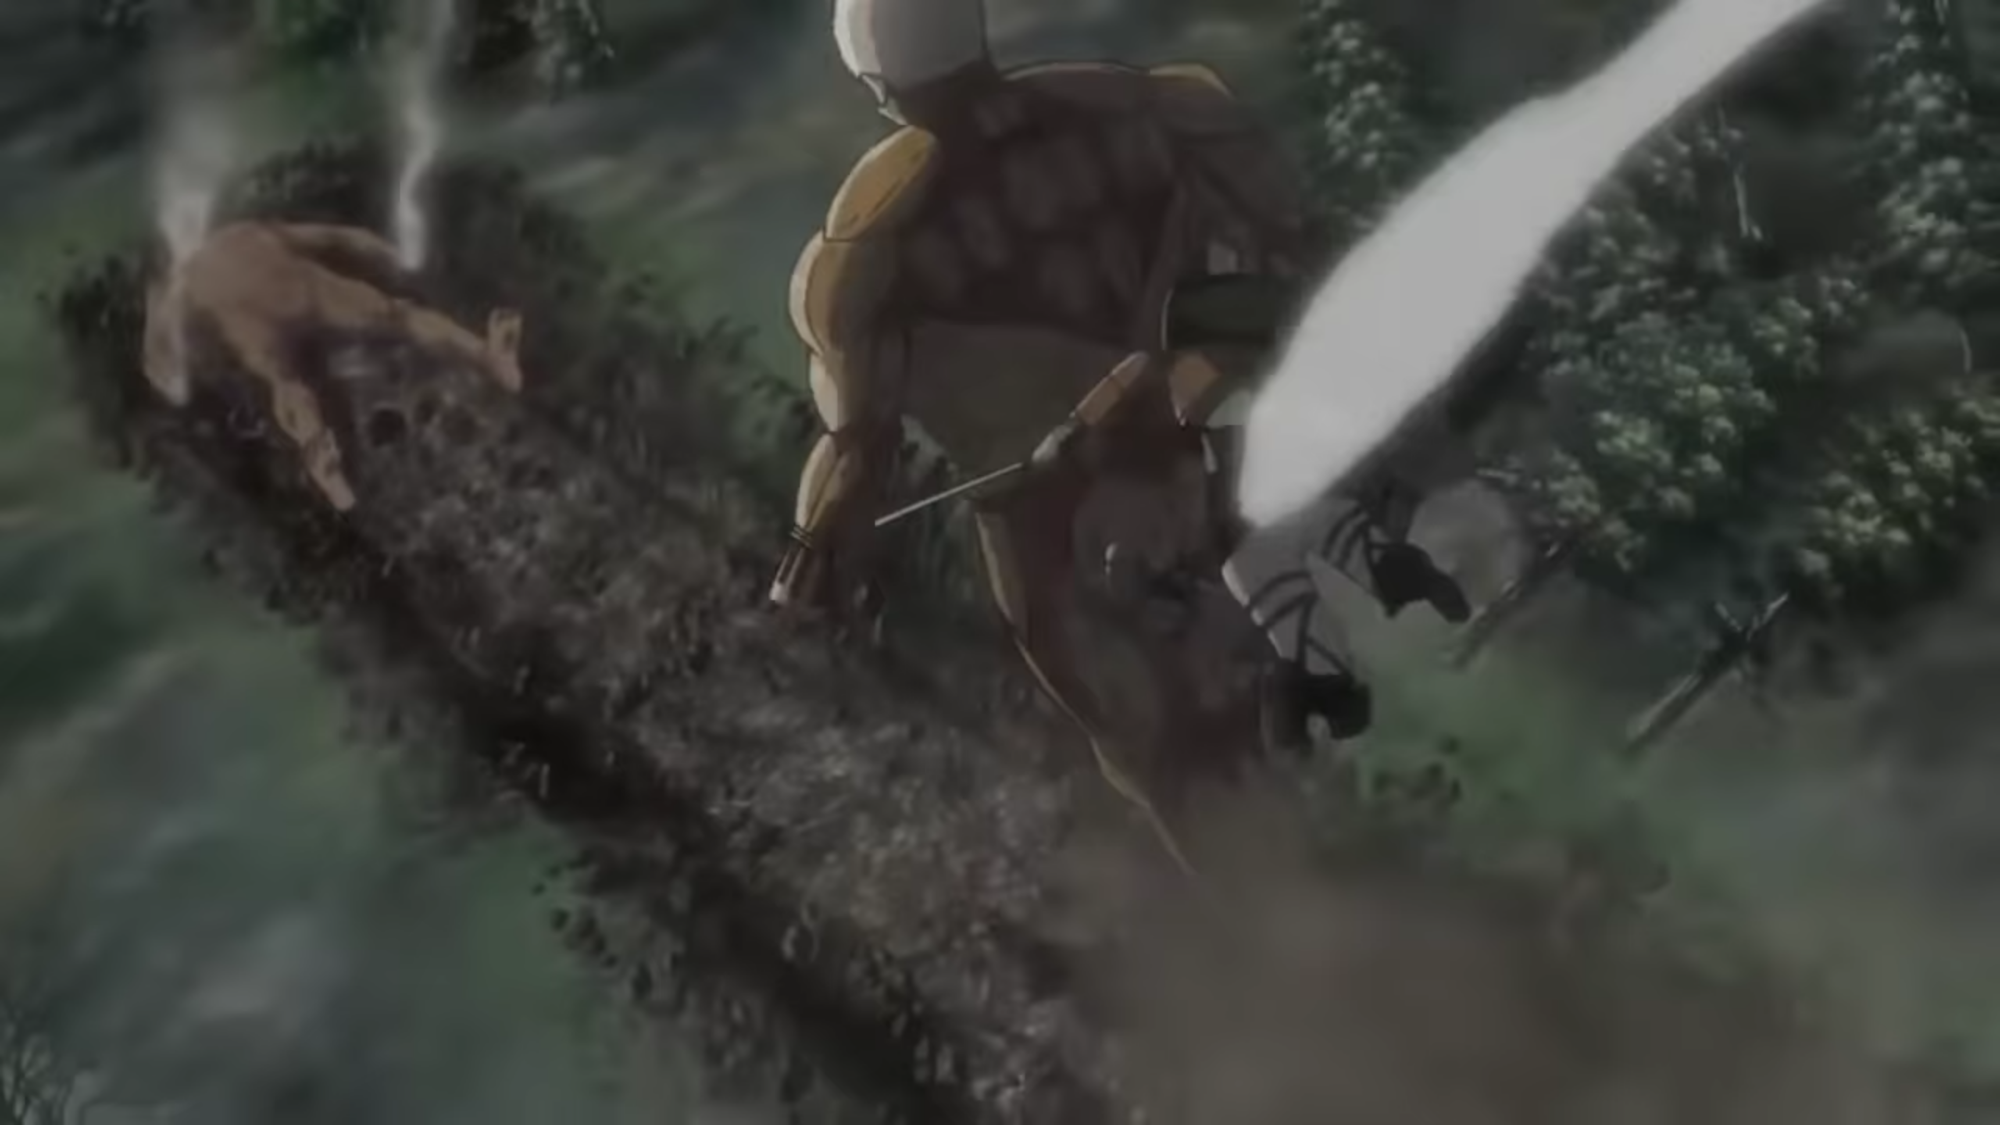 Guys How Does Reiner Exit Out Of The Nape When There Is An Armor Covering The Nape Can He Shed It Fandom